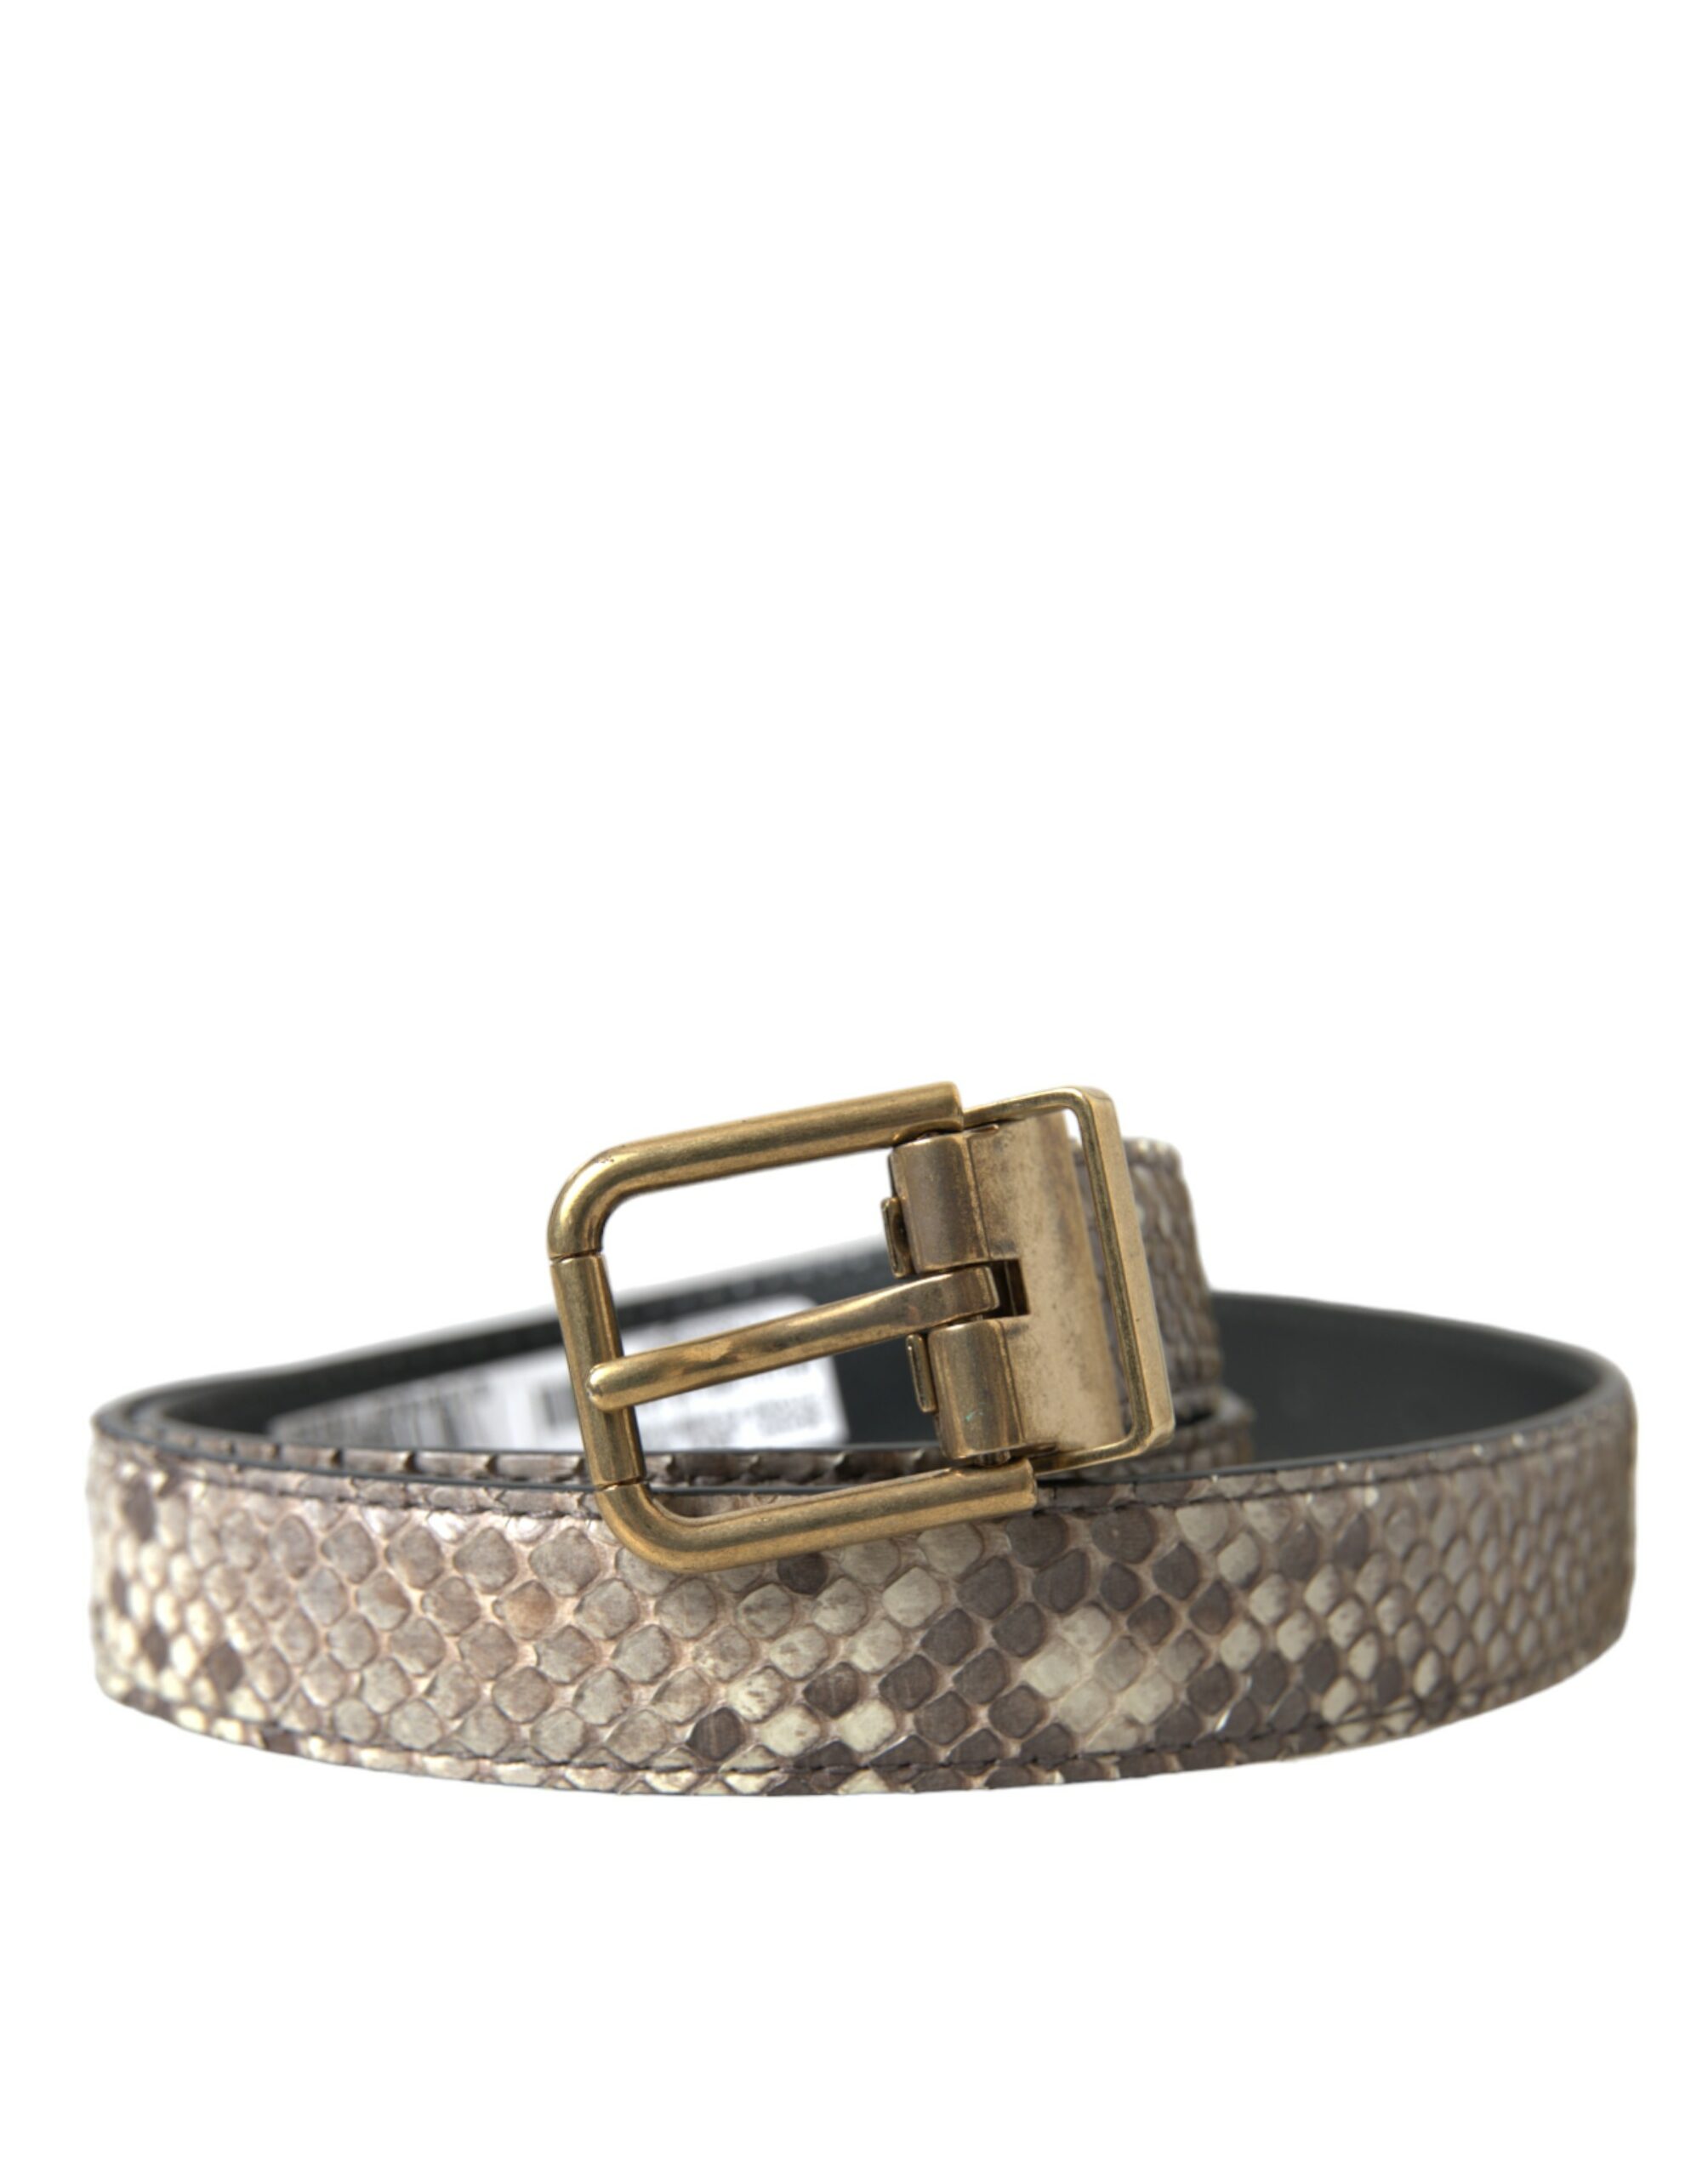 Dolce Gabbana Brown Python Leather Gold Metal Buckle Belt 80 cm 32 Inches